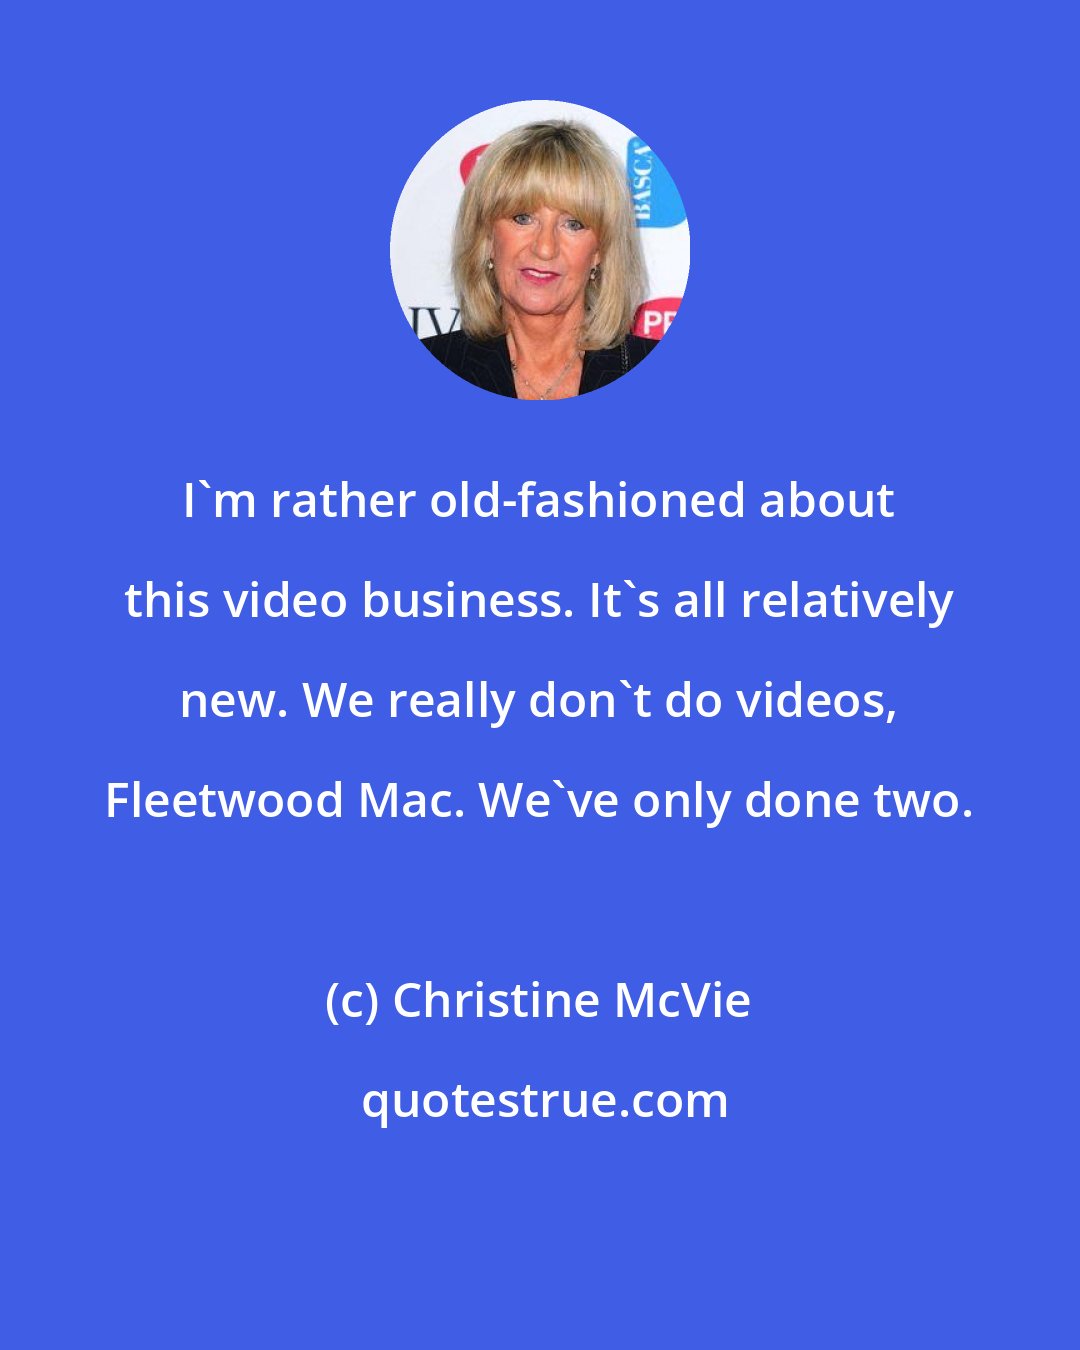 Christine McVie: I'm rather old-fashioned about this video business. It's all relatively new. We really don't do videos, Fleetwood Mac. We've only done two.